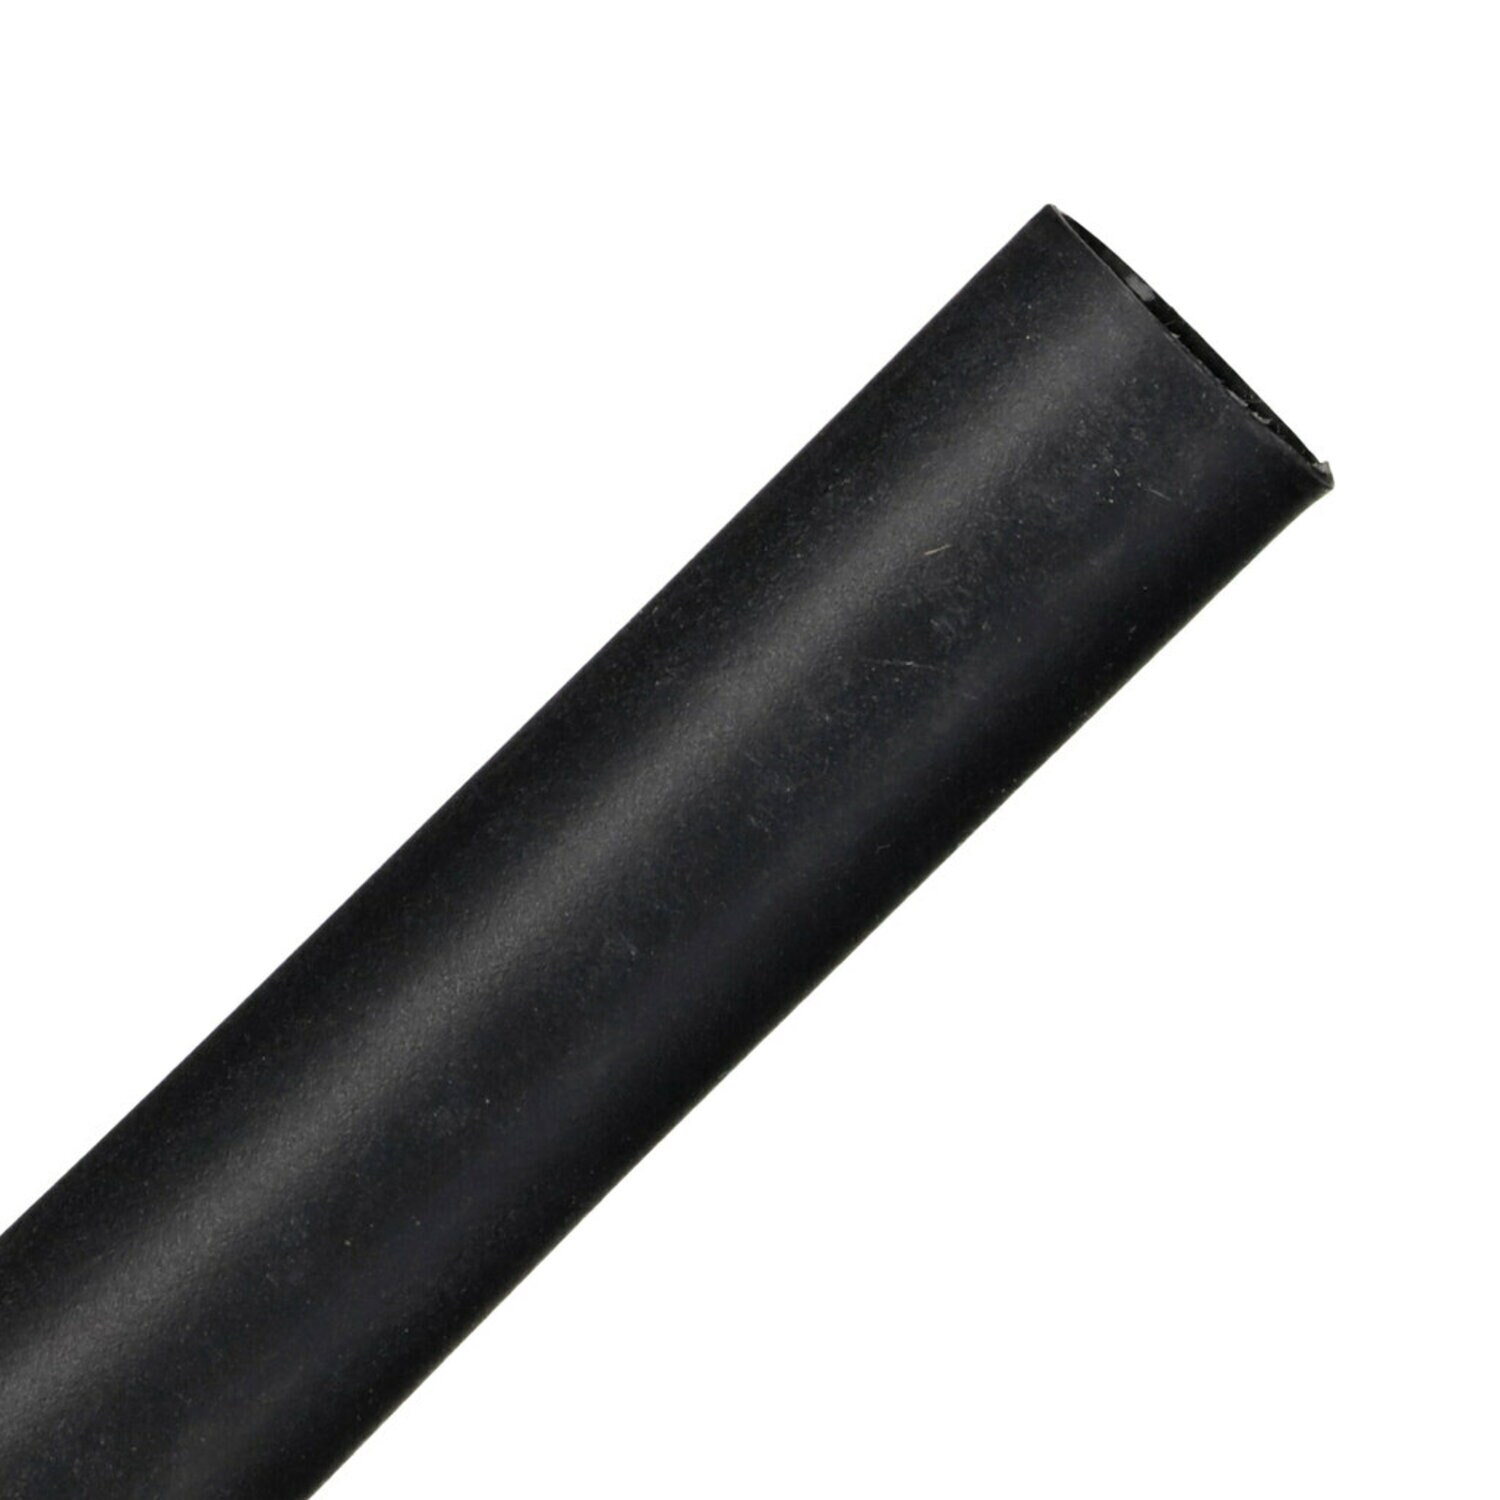 7000133615 - 3M Thin-Wall Heat Shrink Tubing EPS-300, Adhesive-Lined,
3/8-48"-Black-125 Pcs, 48 in length sticks, 125 pieces/case